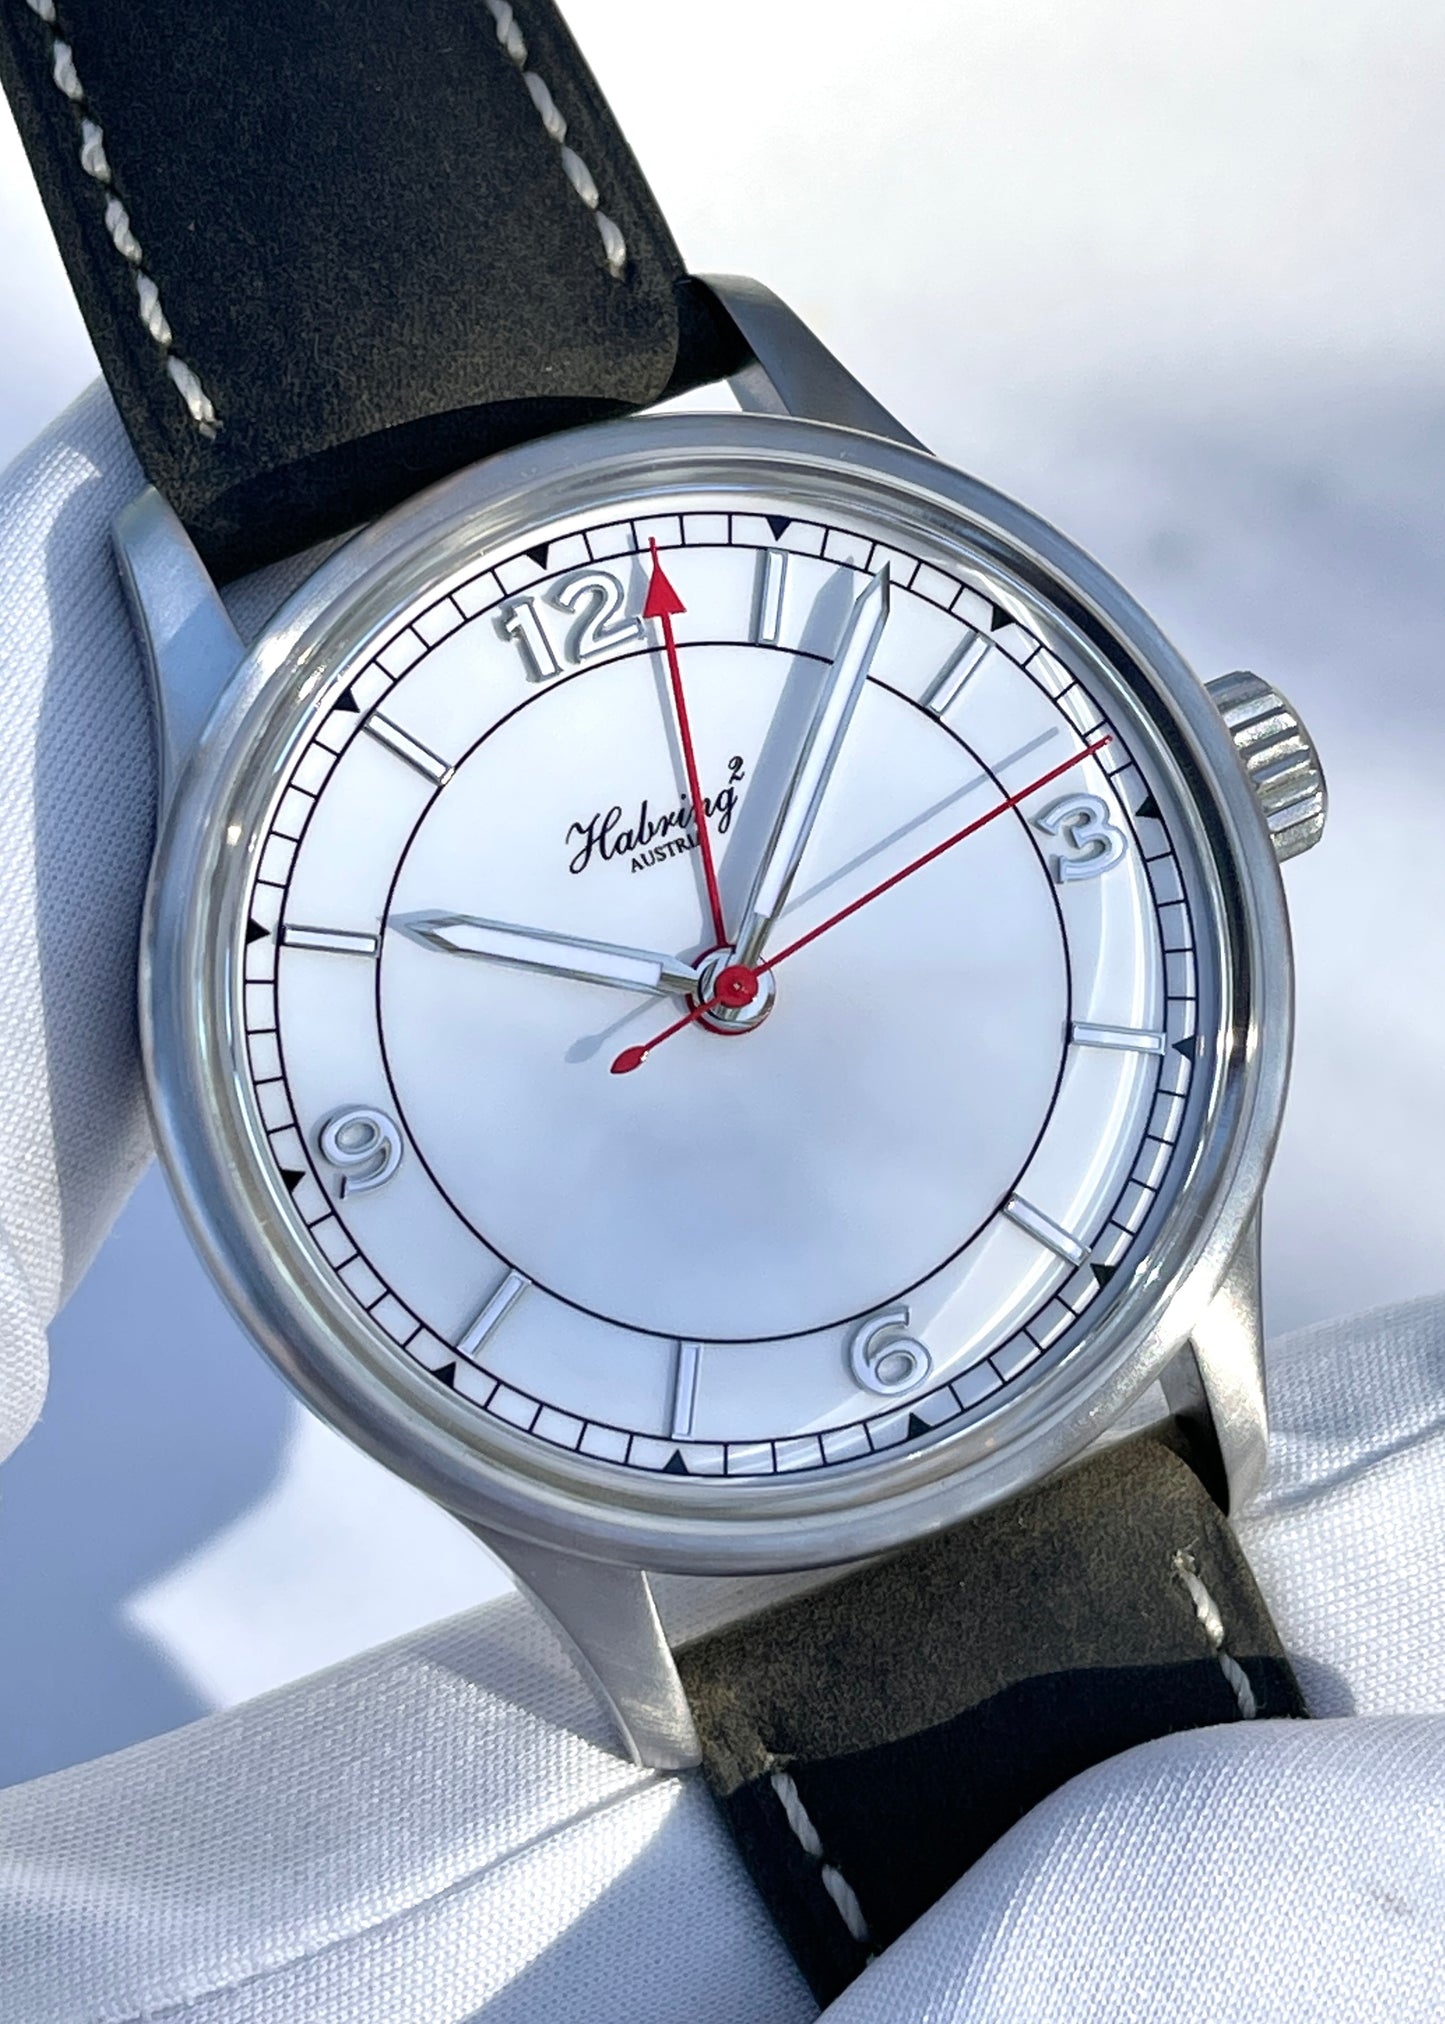 Habring² COS ZM Chronograph - White Dial (Discontinued)